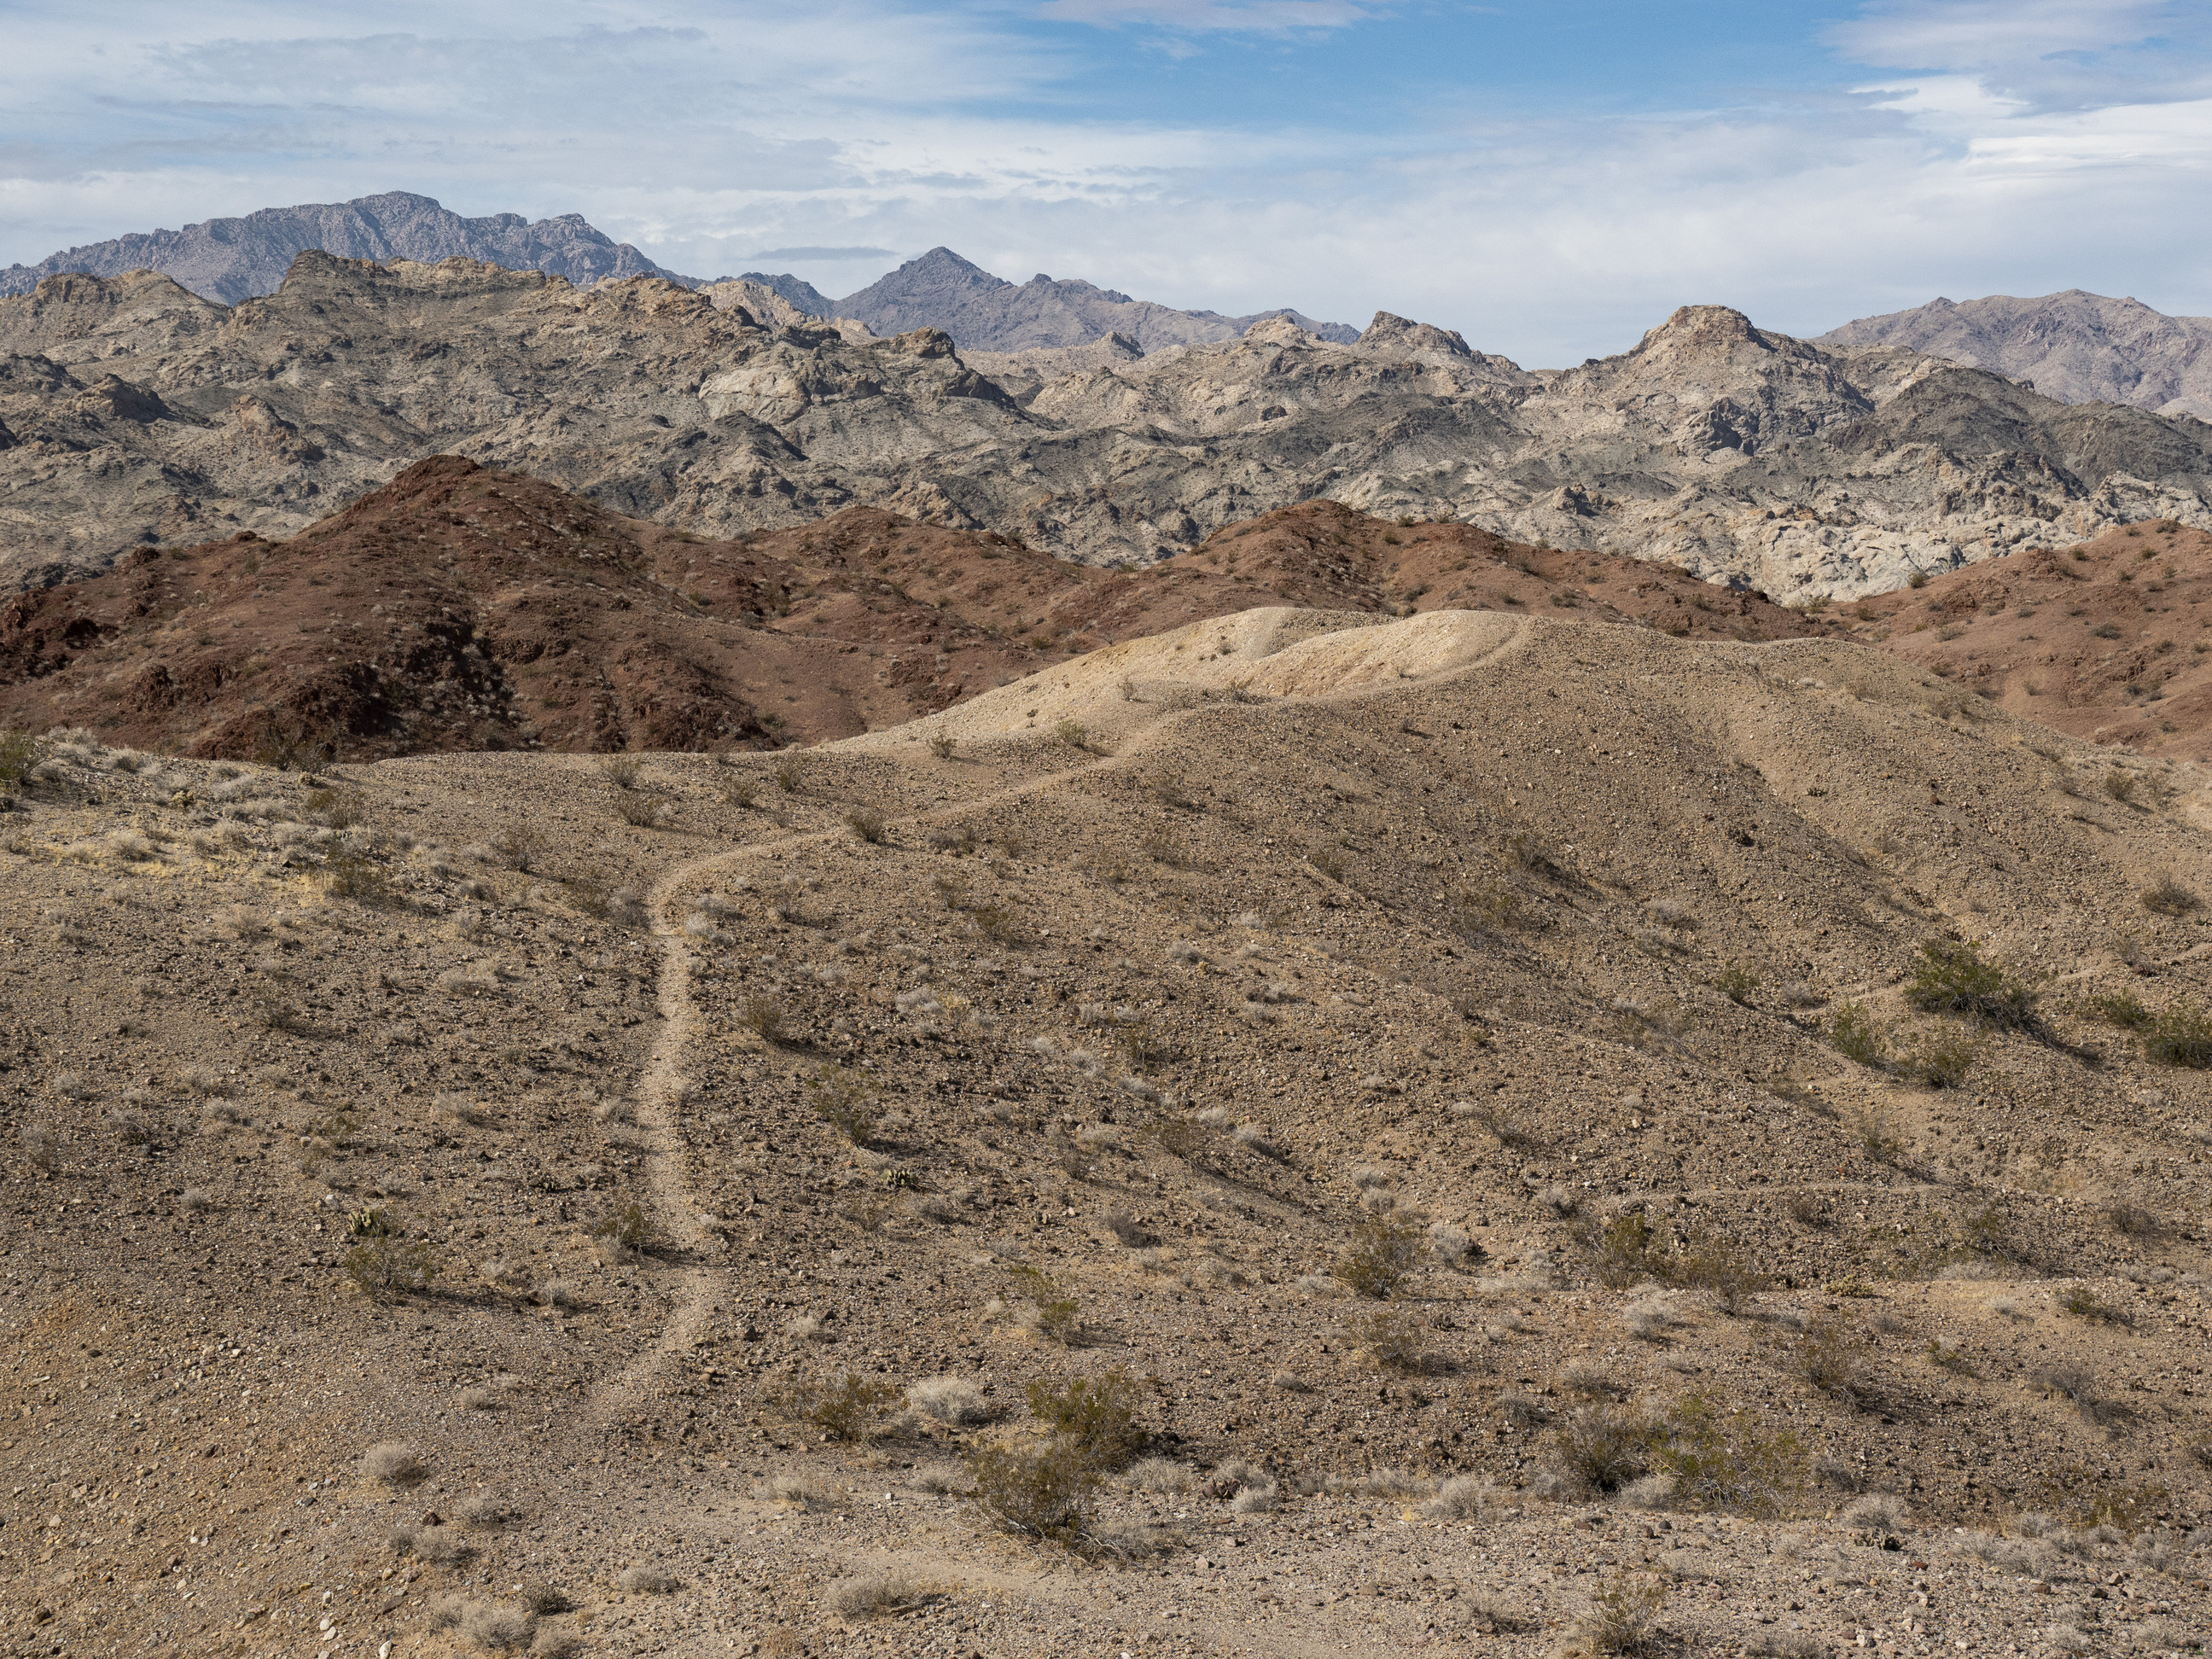 narrow trail leading through center, hills in foreground, rugged mountains and sky in distance